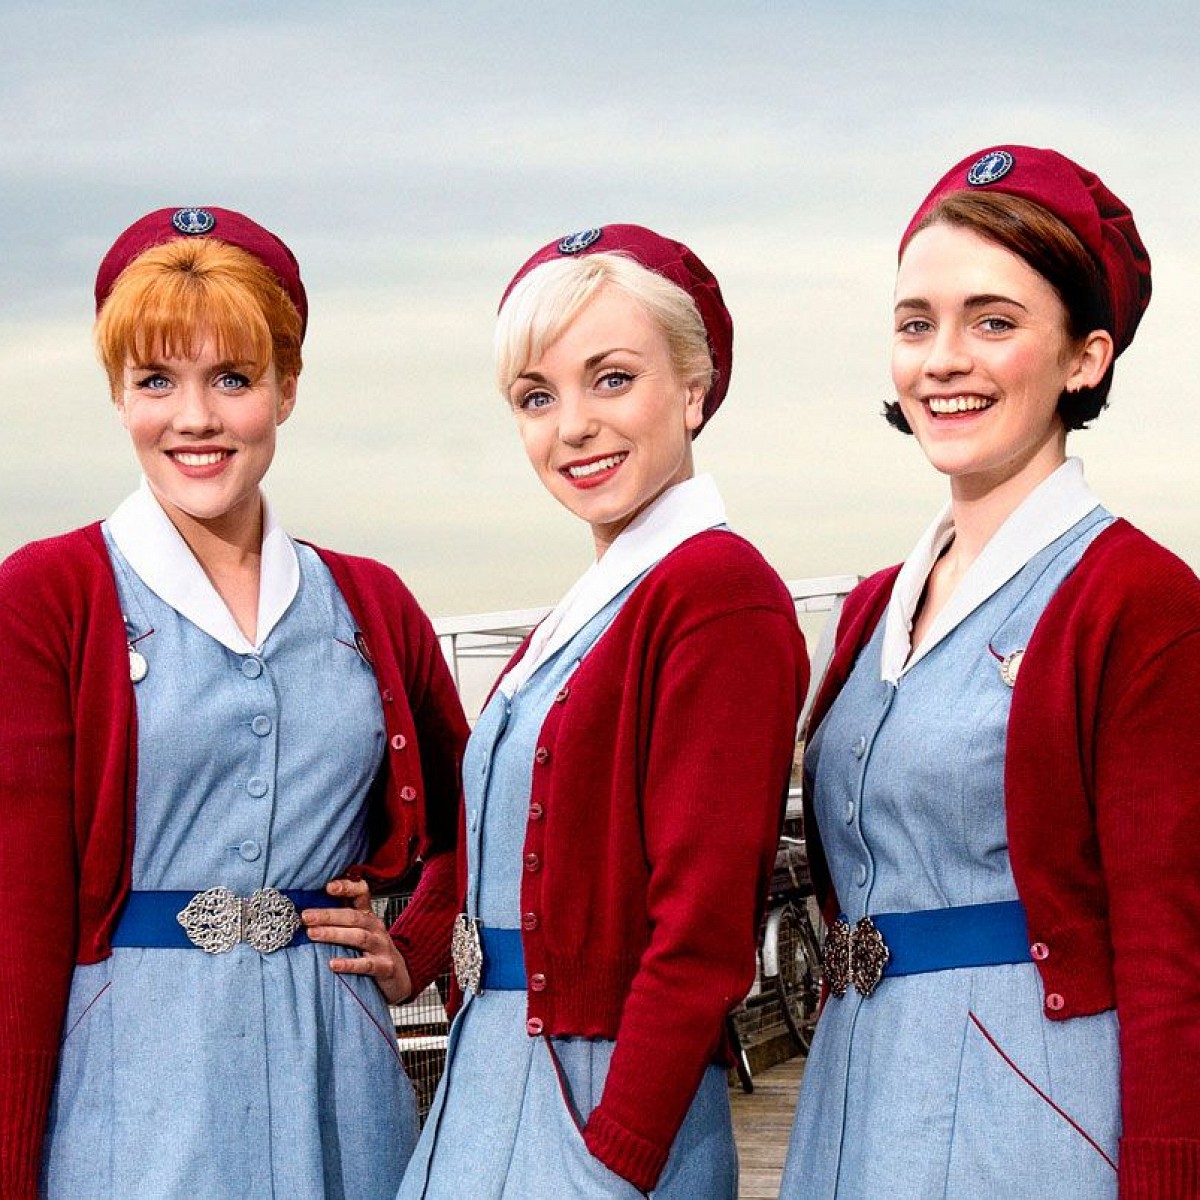 Call the midwife does take quite intimate subjects and enables people to di...